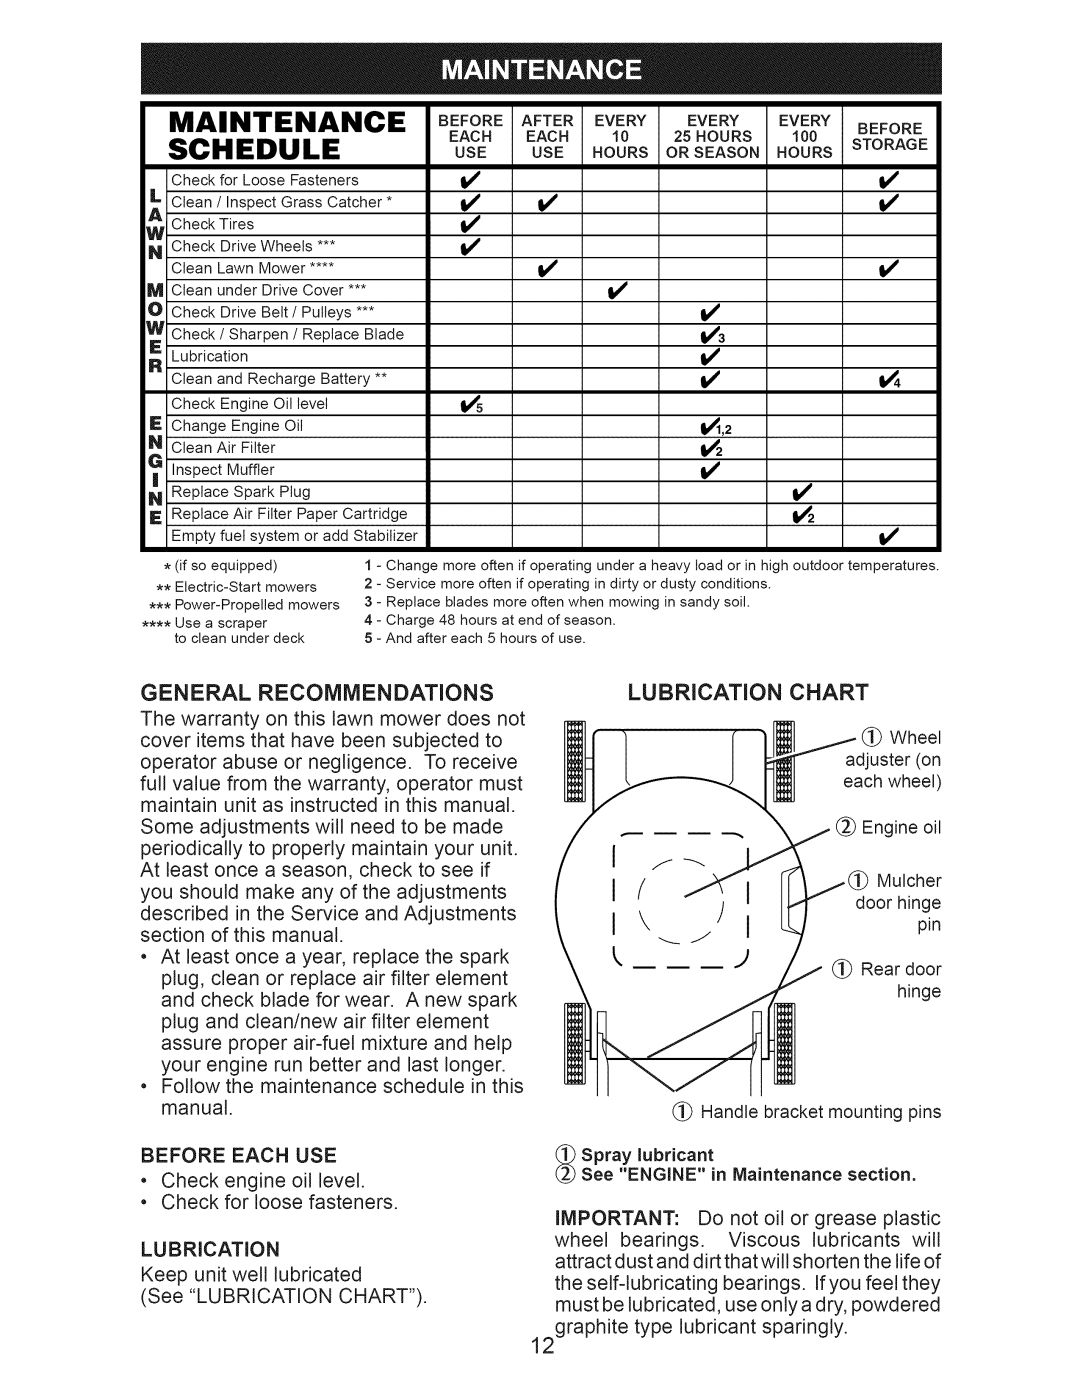 Craftsman 917.376407 owner manual Maintenance, Schedule, Use Hours 